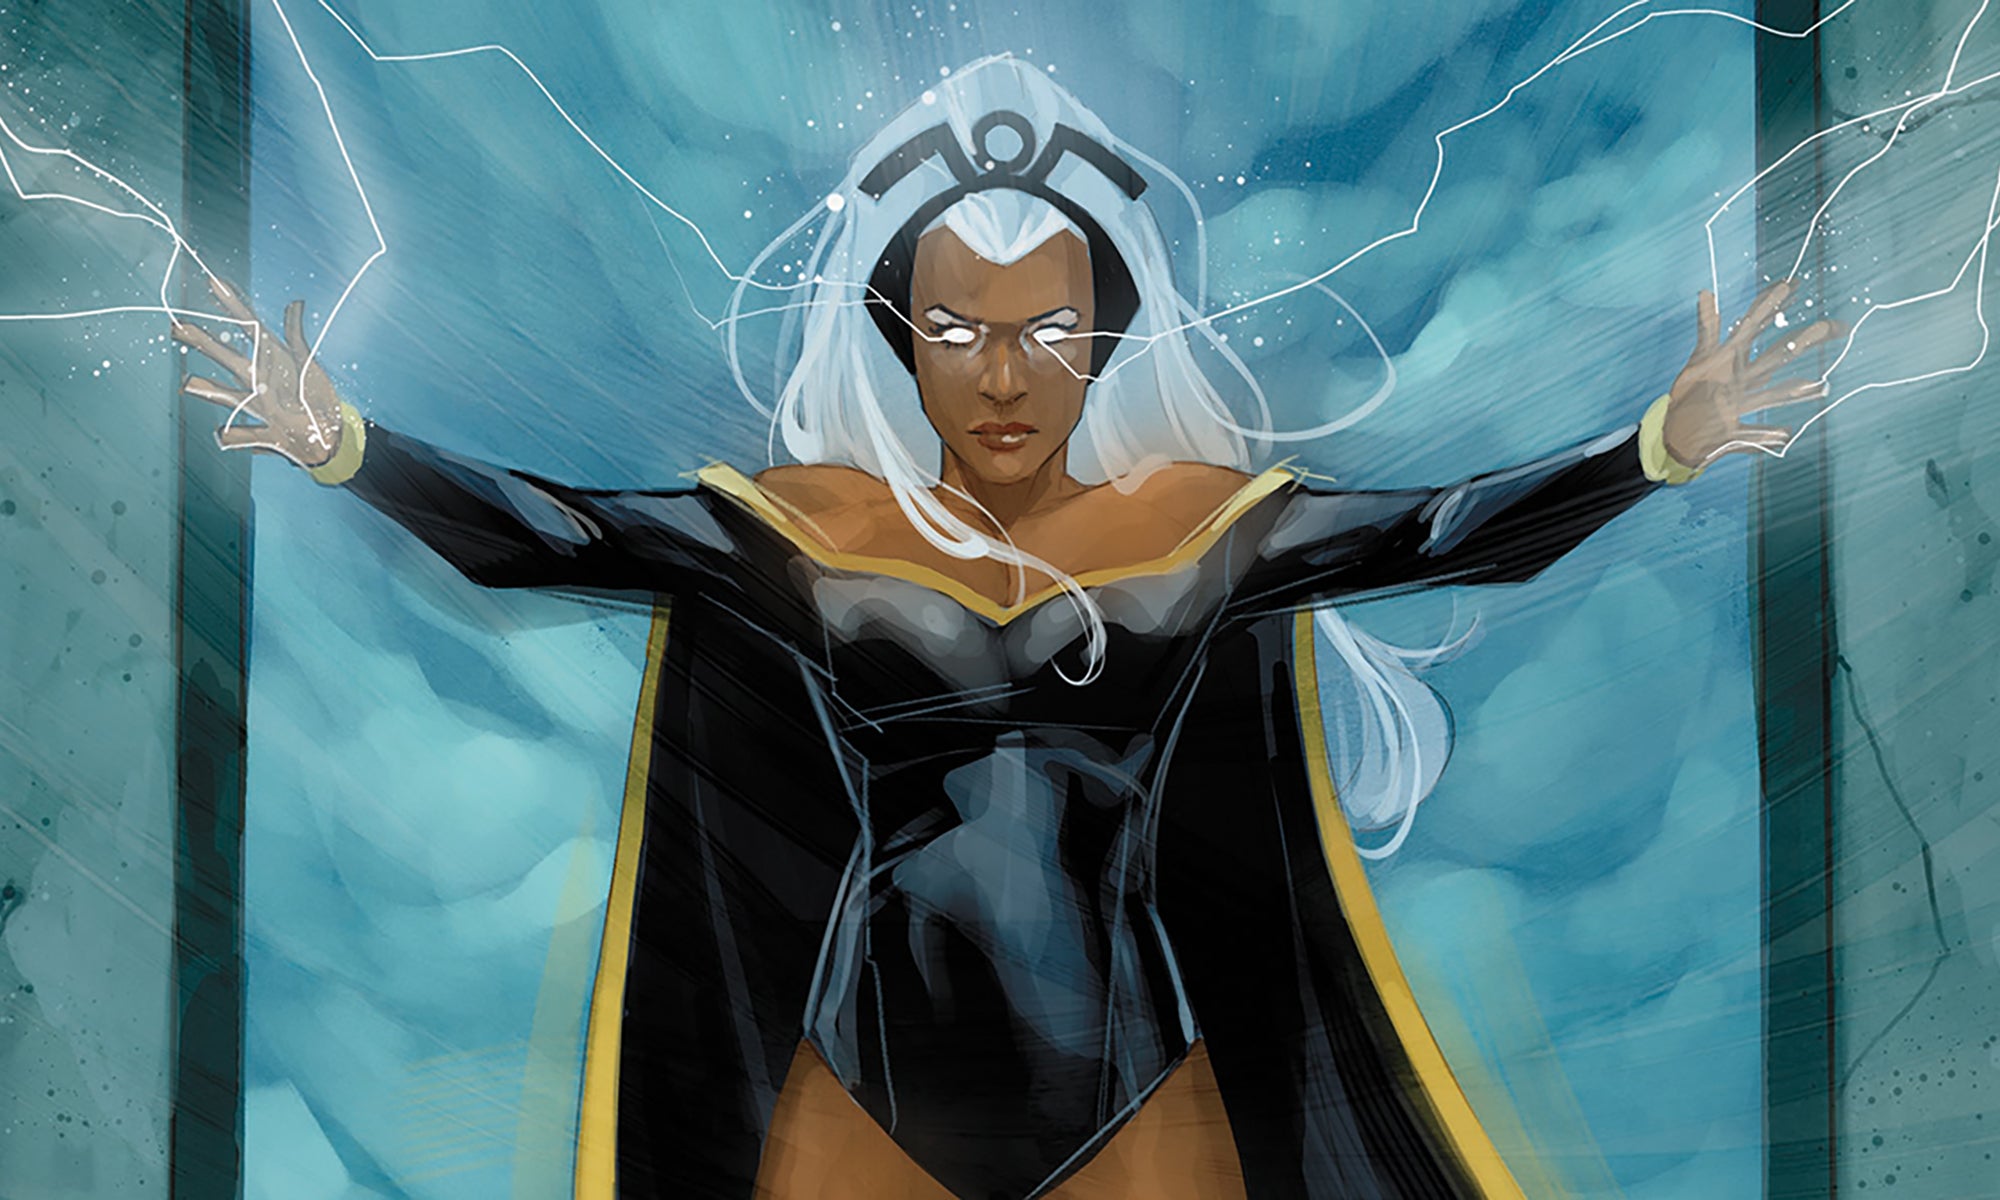 Marvel's Most Underrated Female Superheroes and Villains